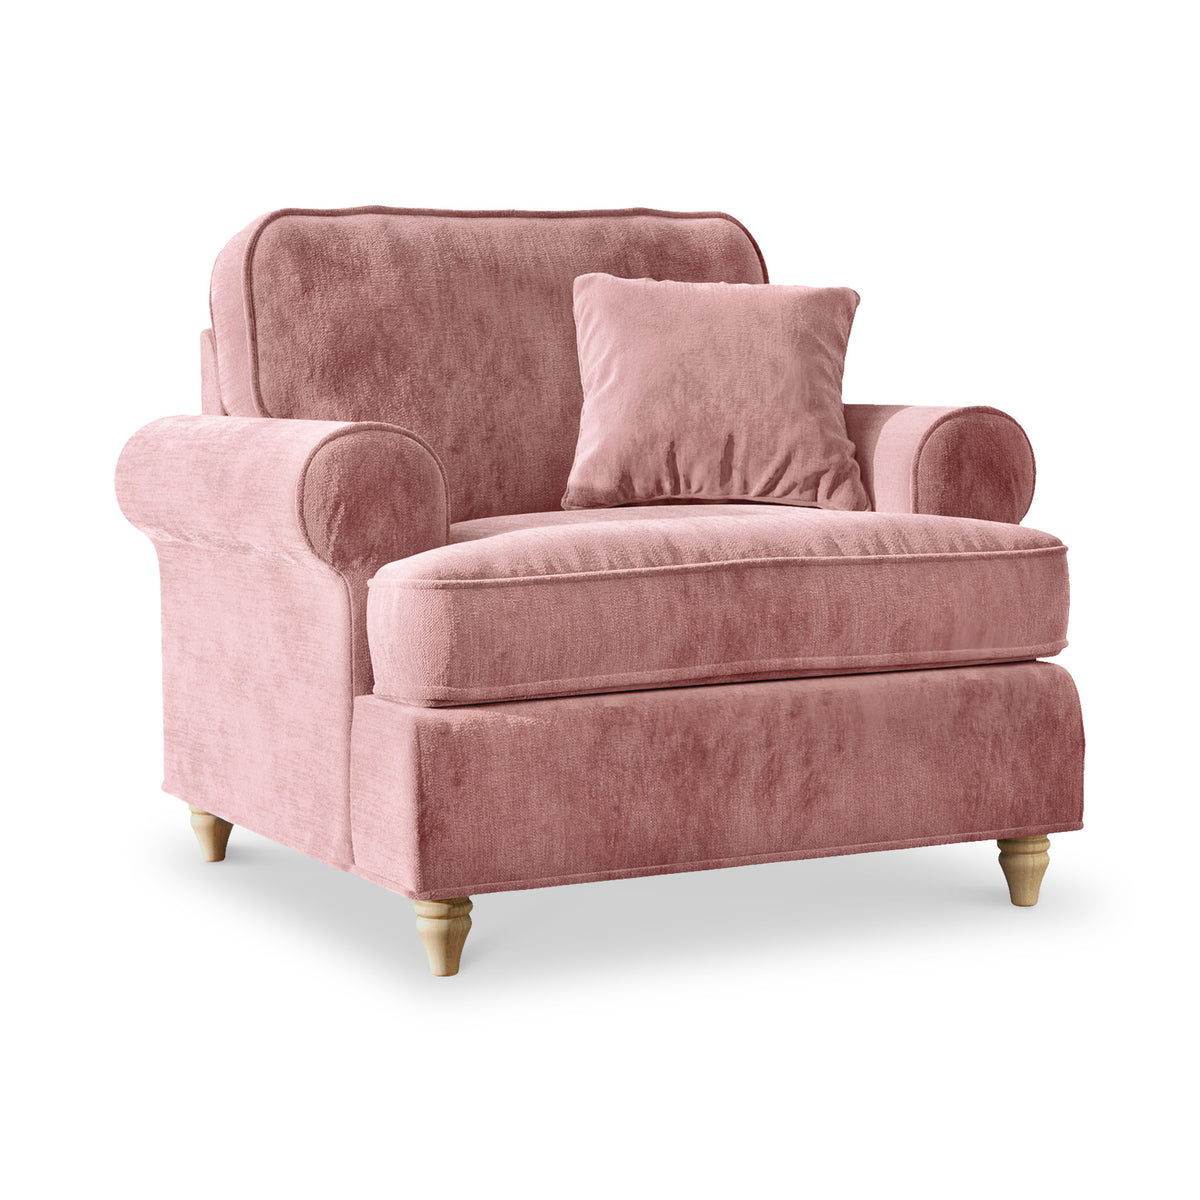 Alfie Armchair in Blush Pink  by Roseland Furniture